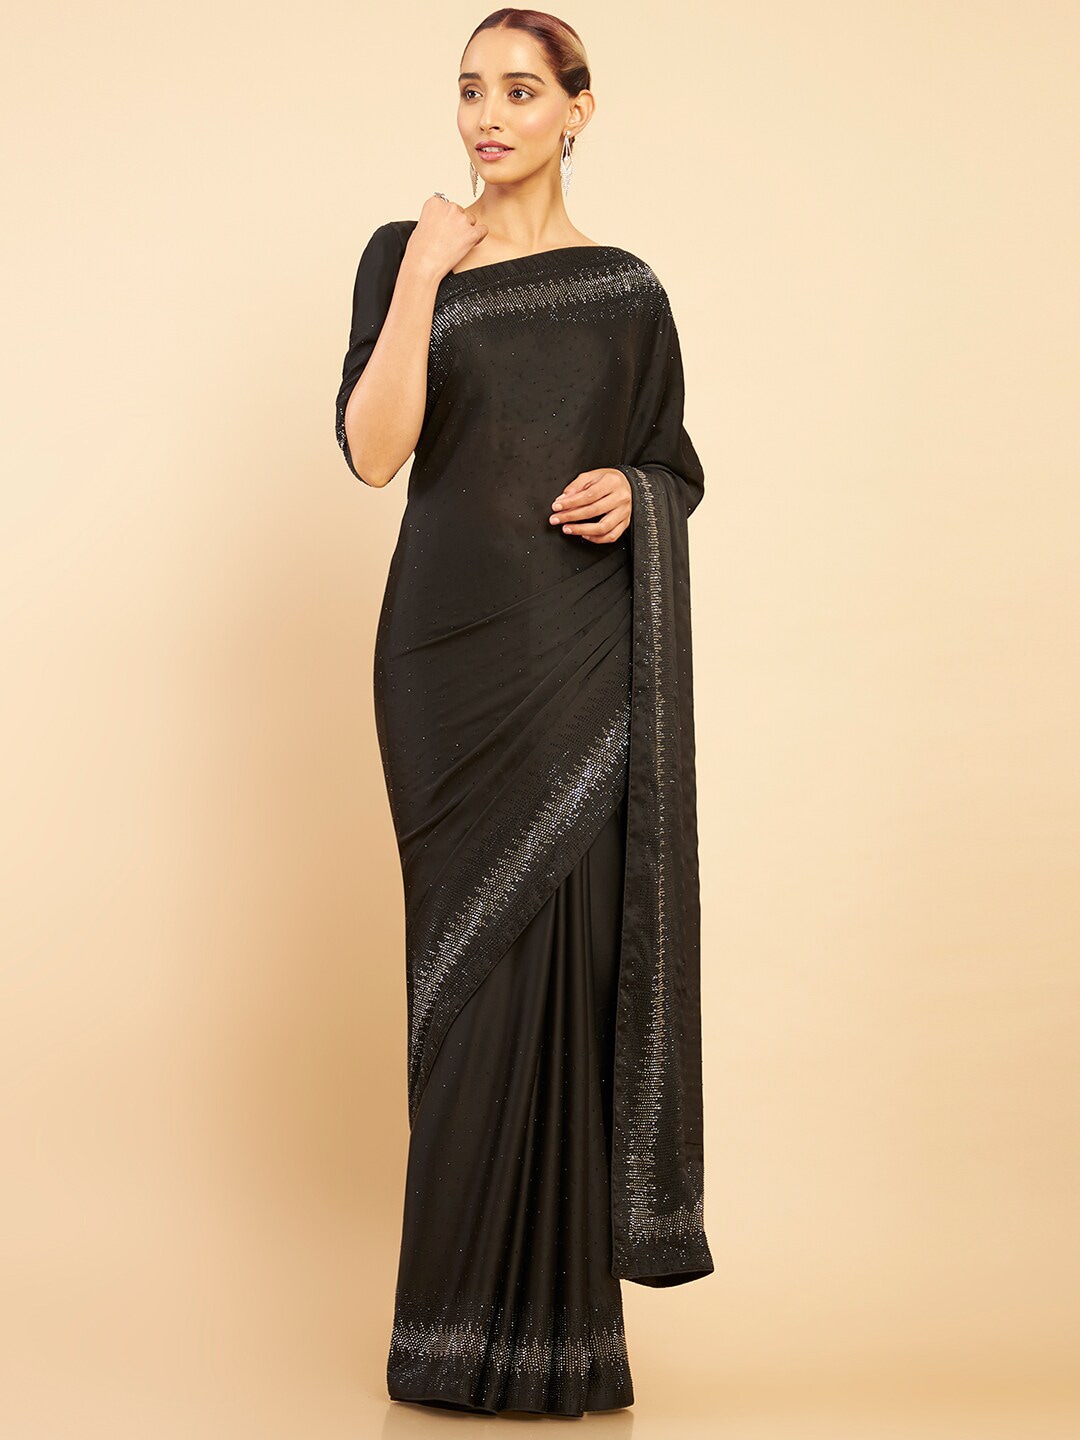 Soch Black & Silver-Toned Embellished Pure Crepe Saree Price in India